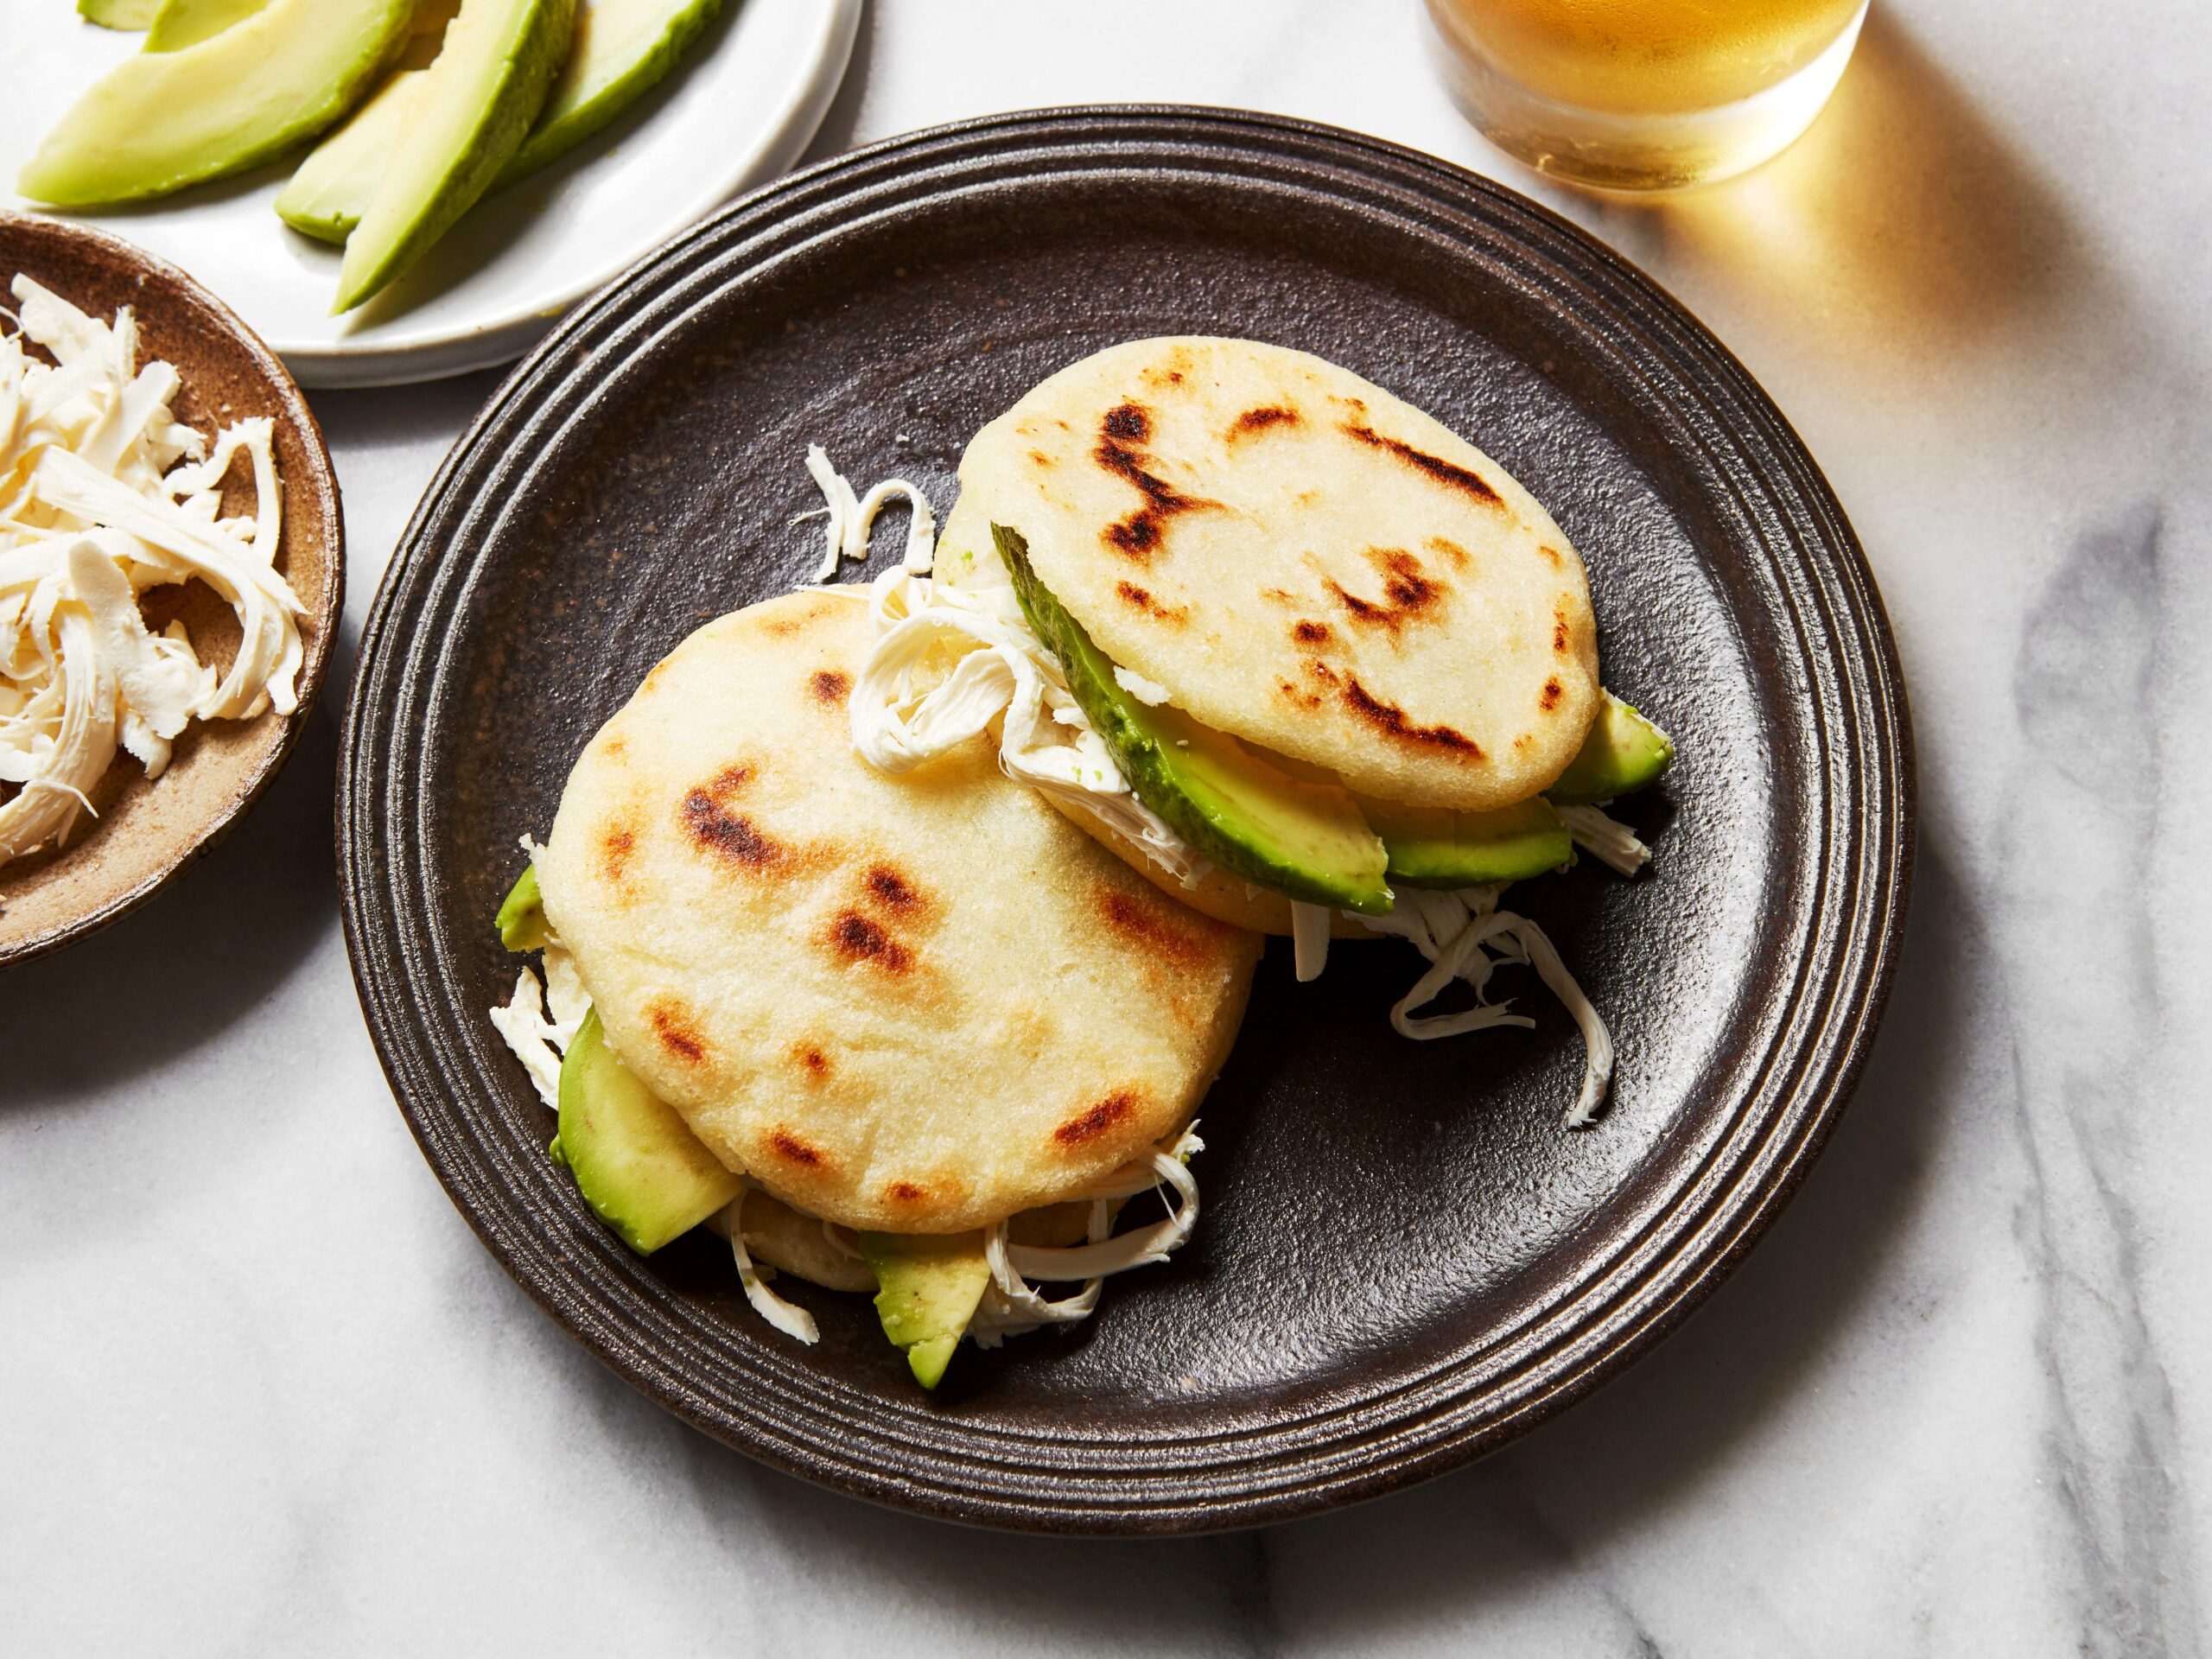  Arepas stuffed to the brim with chorizo and mozzarella cheese for a flavorful and filling meal.